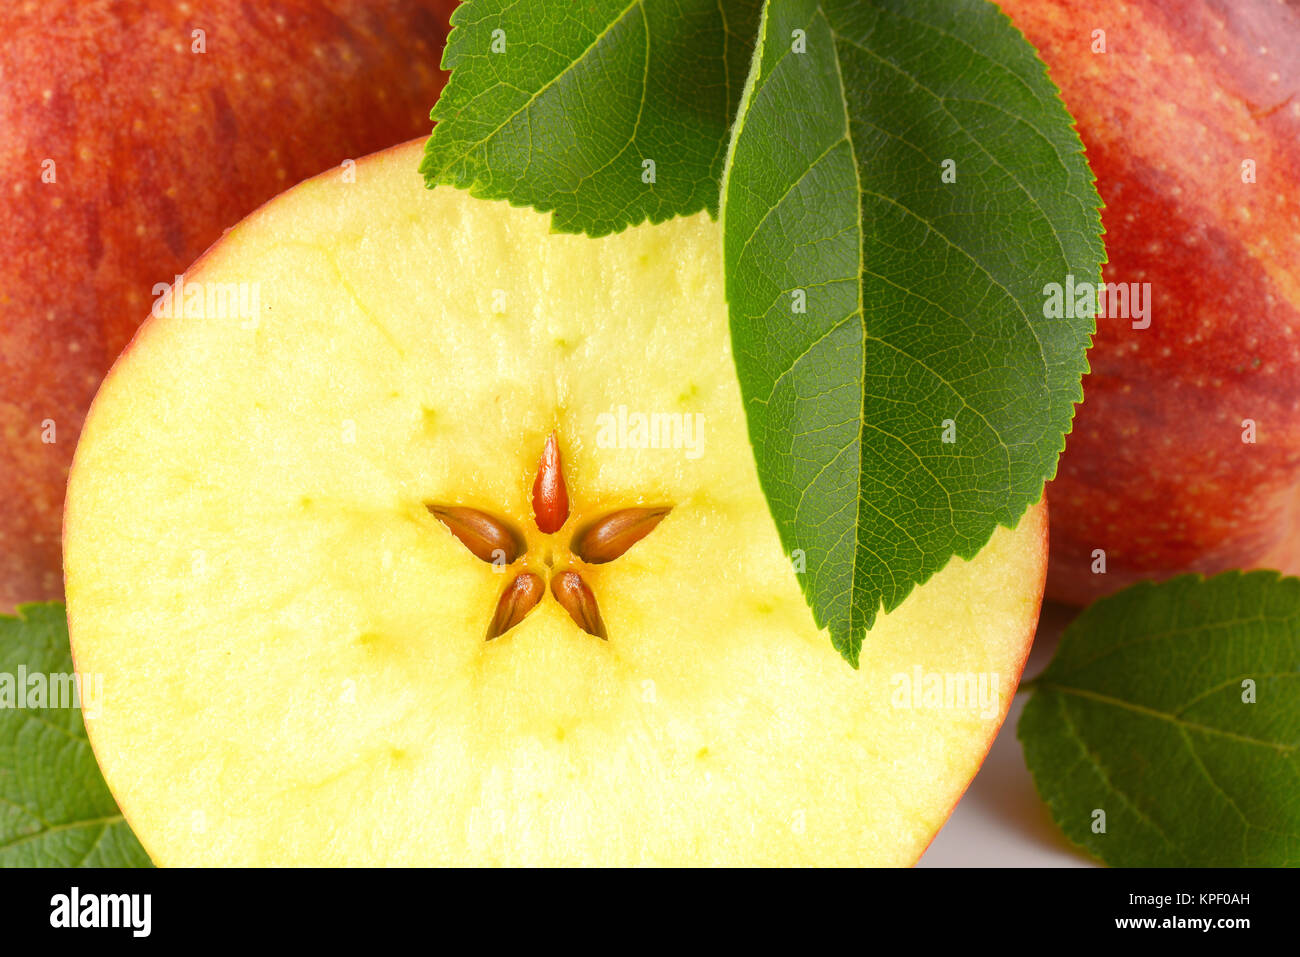 half an apple with a star-shaped core Stock Photo